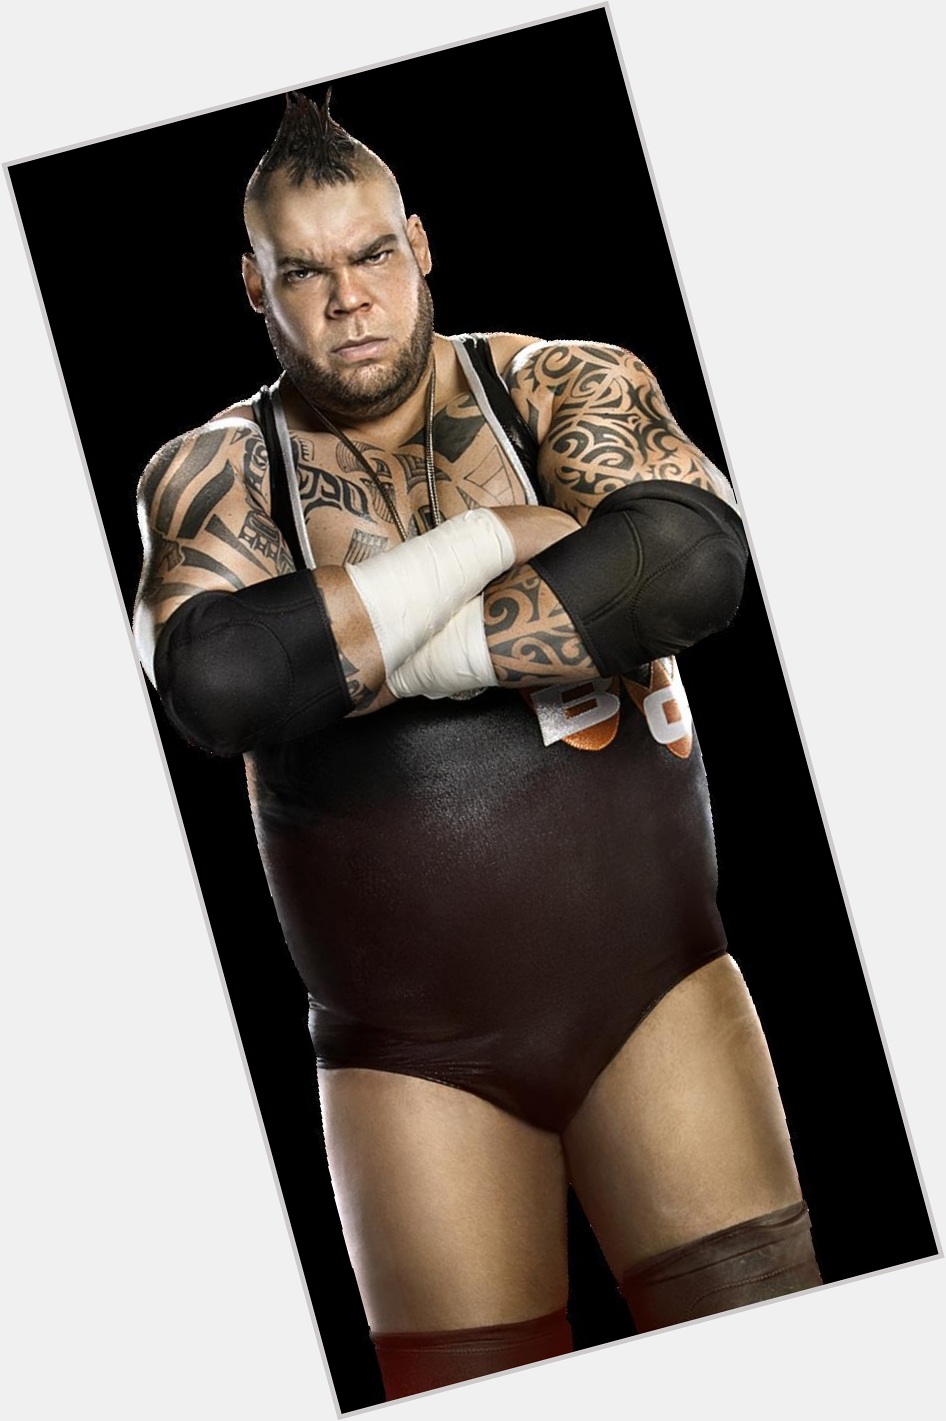 Https://fanpagepress.net/m/B/Brodus Clay Exclusive Hot Pic 3